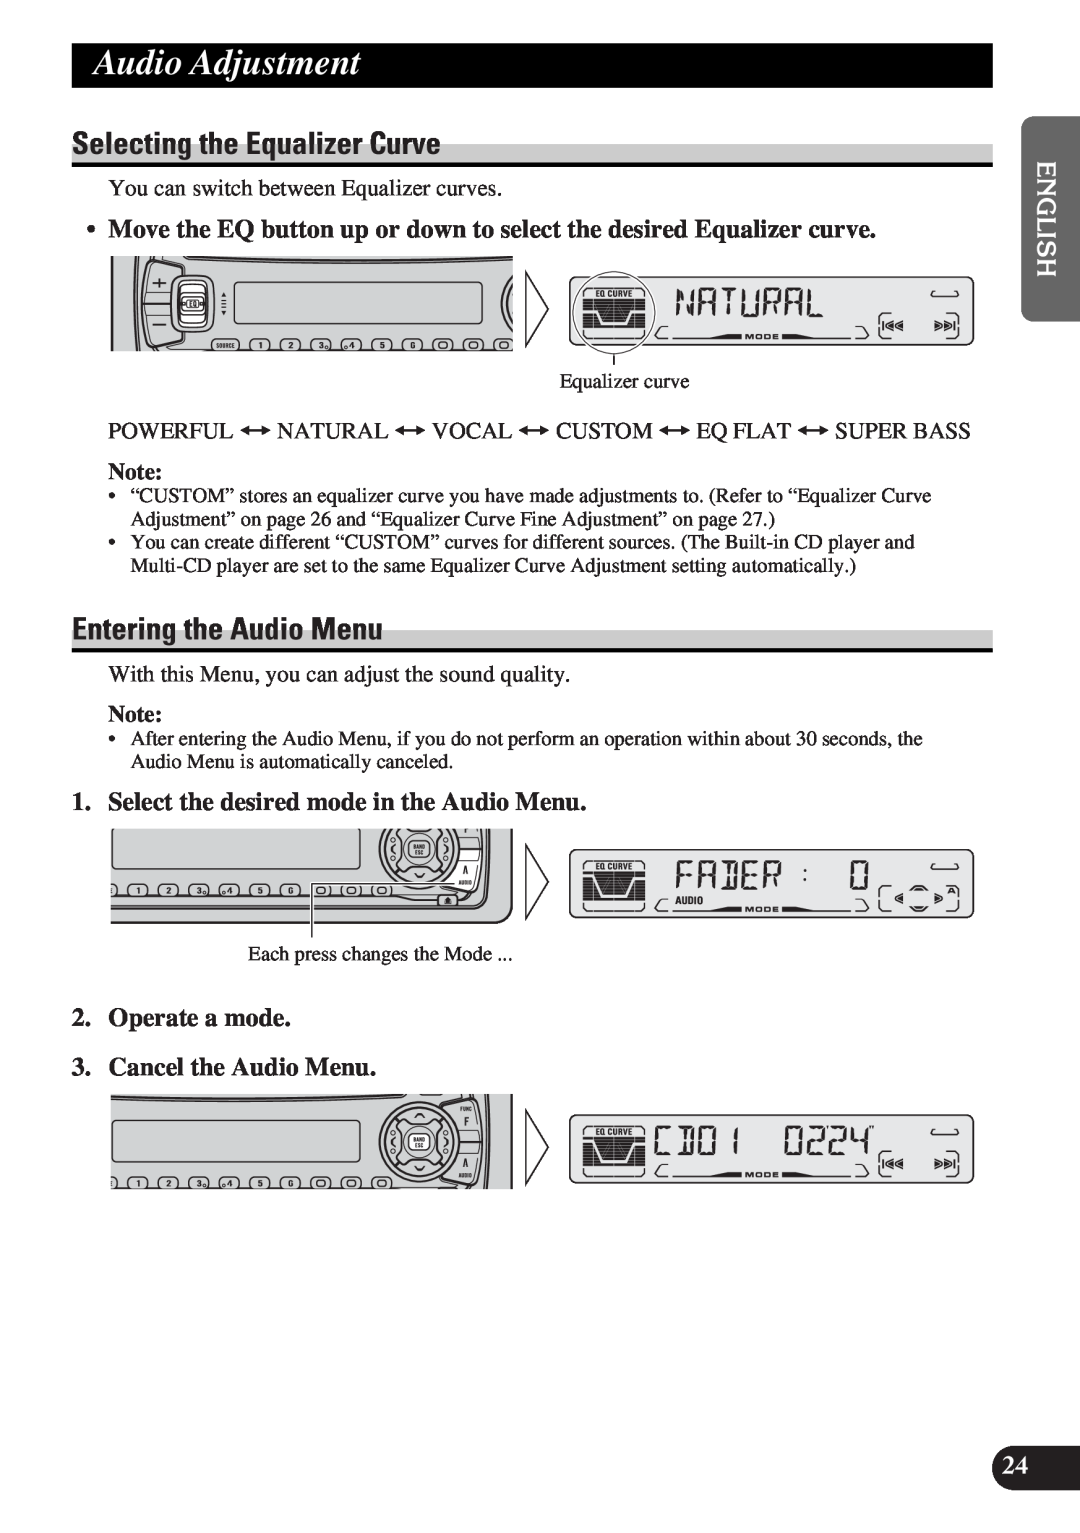 Pioneer DEH-P3150-B operation manual Audio Adjustment, Selecting the Equalizer Curve, Entering the Audio Menu 